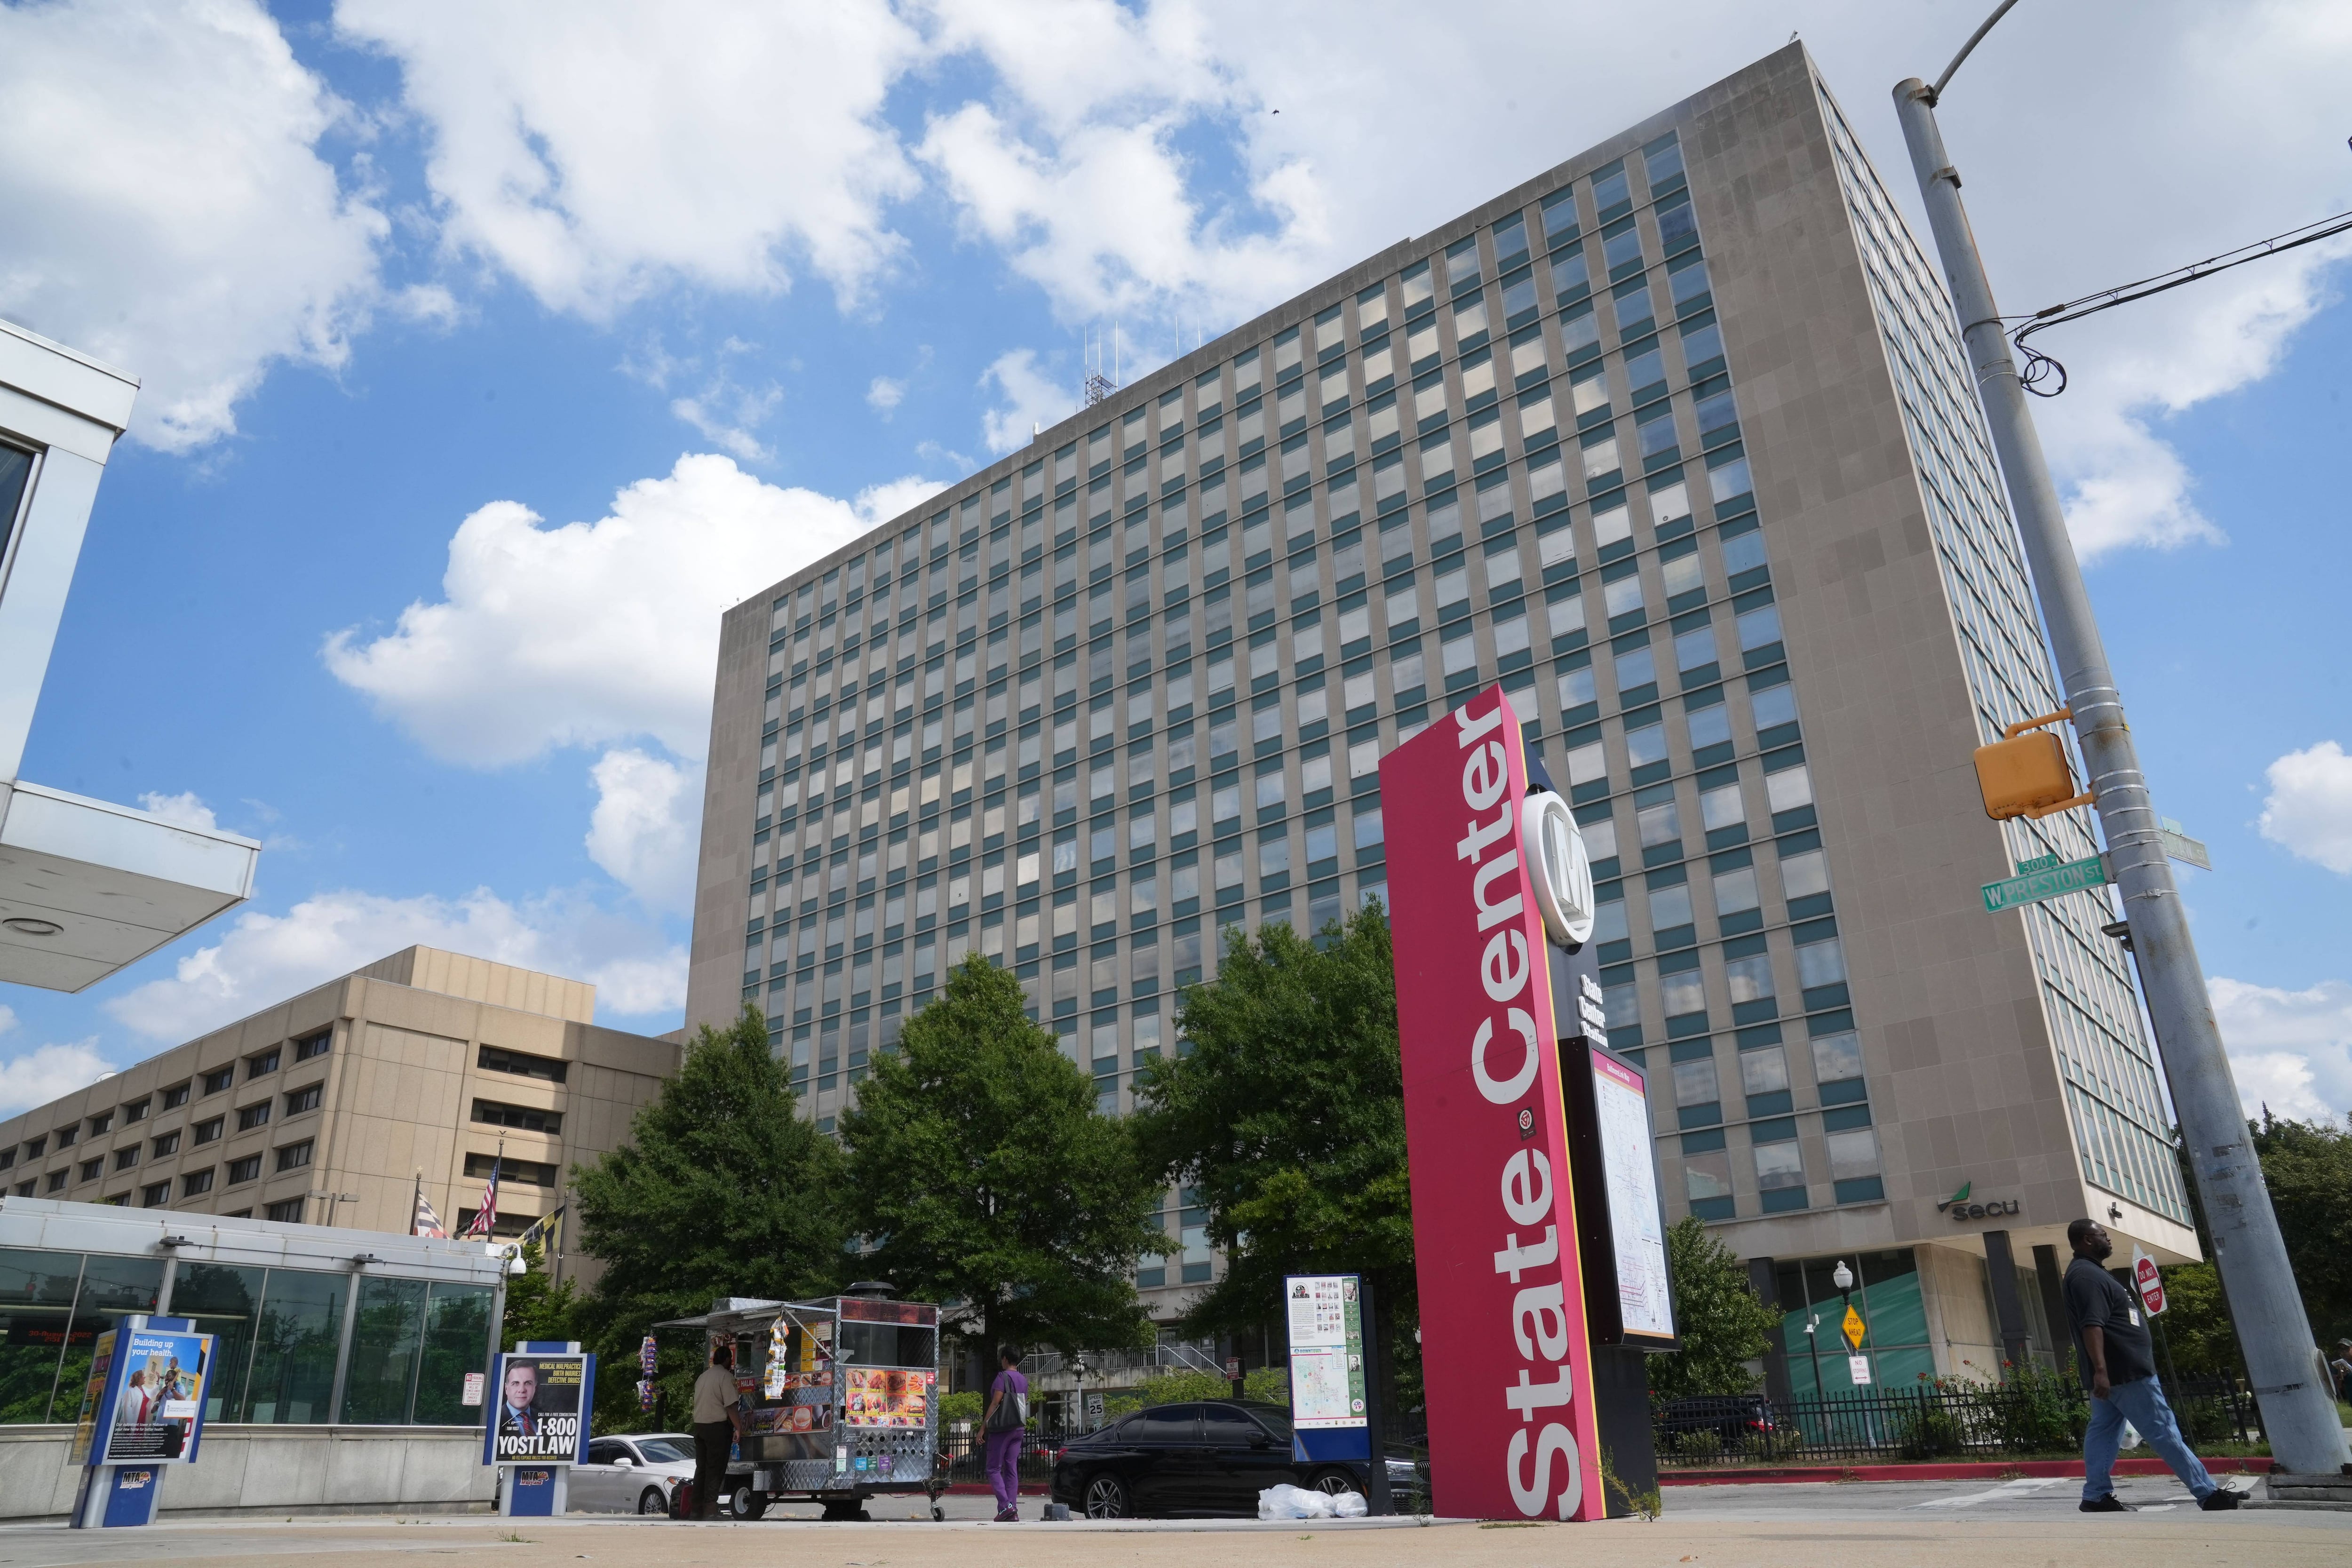 The State Center office complex in Baltimore has long been slated for redevelopment.